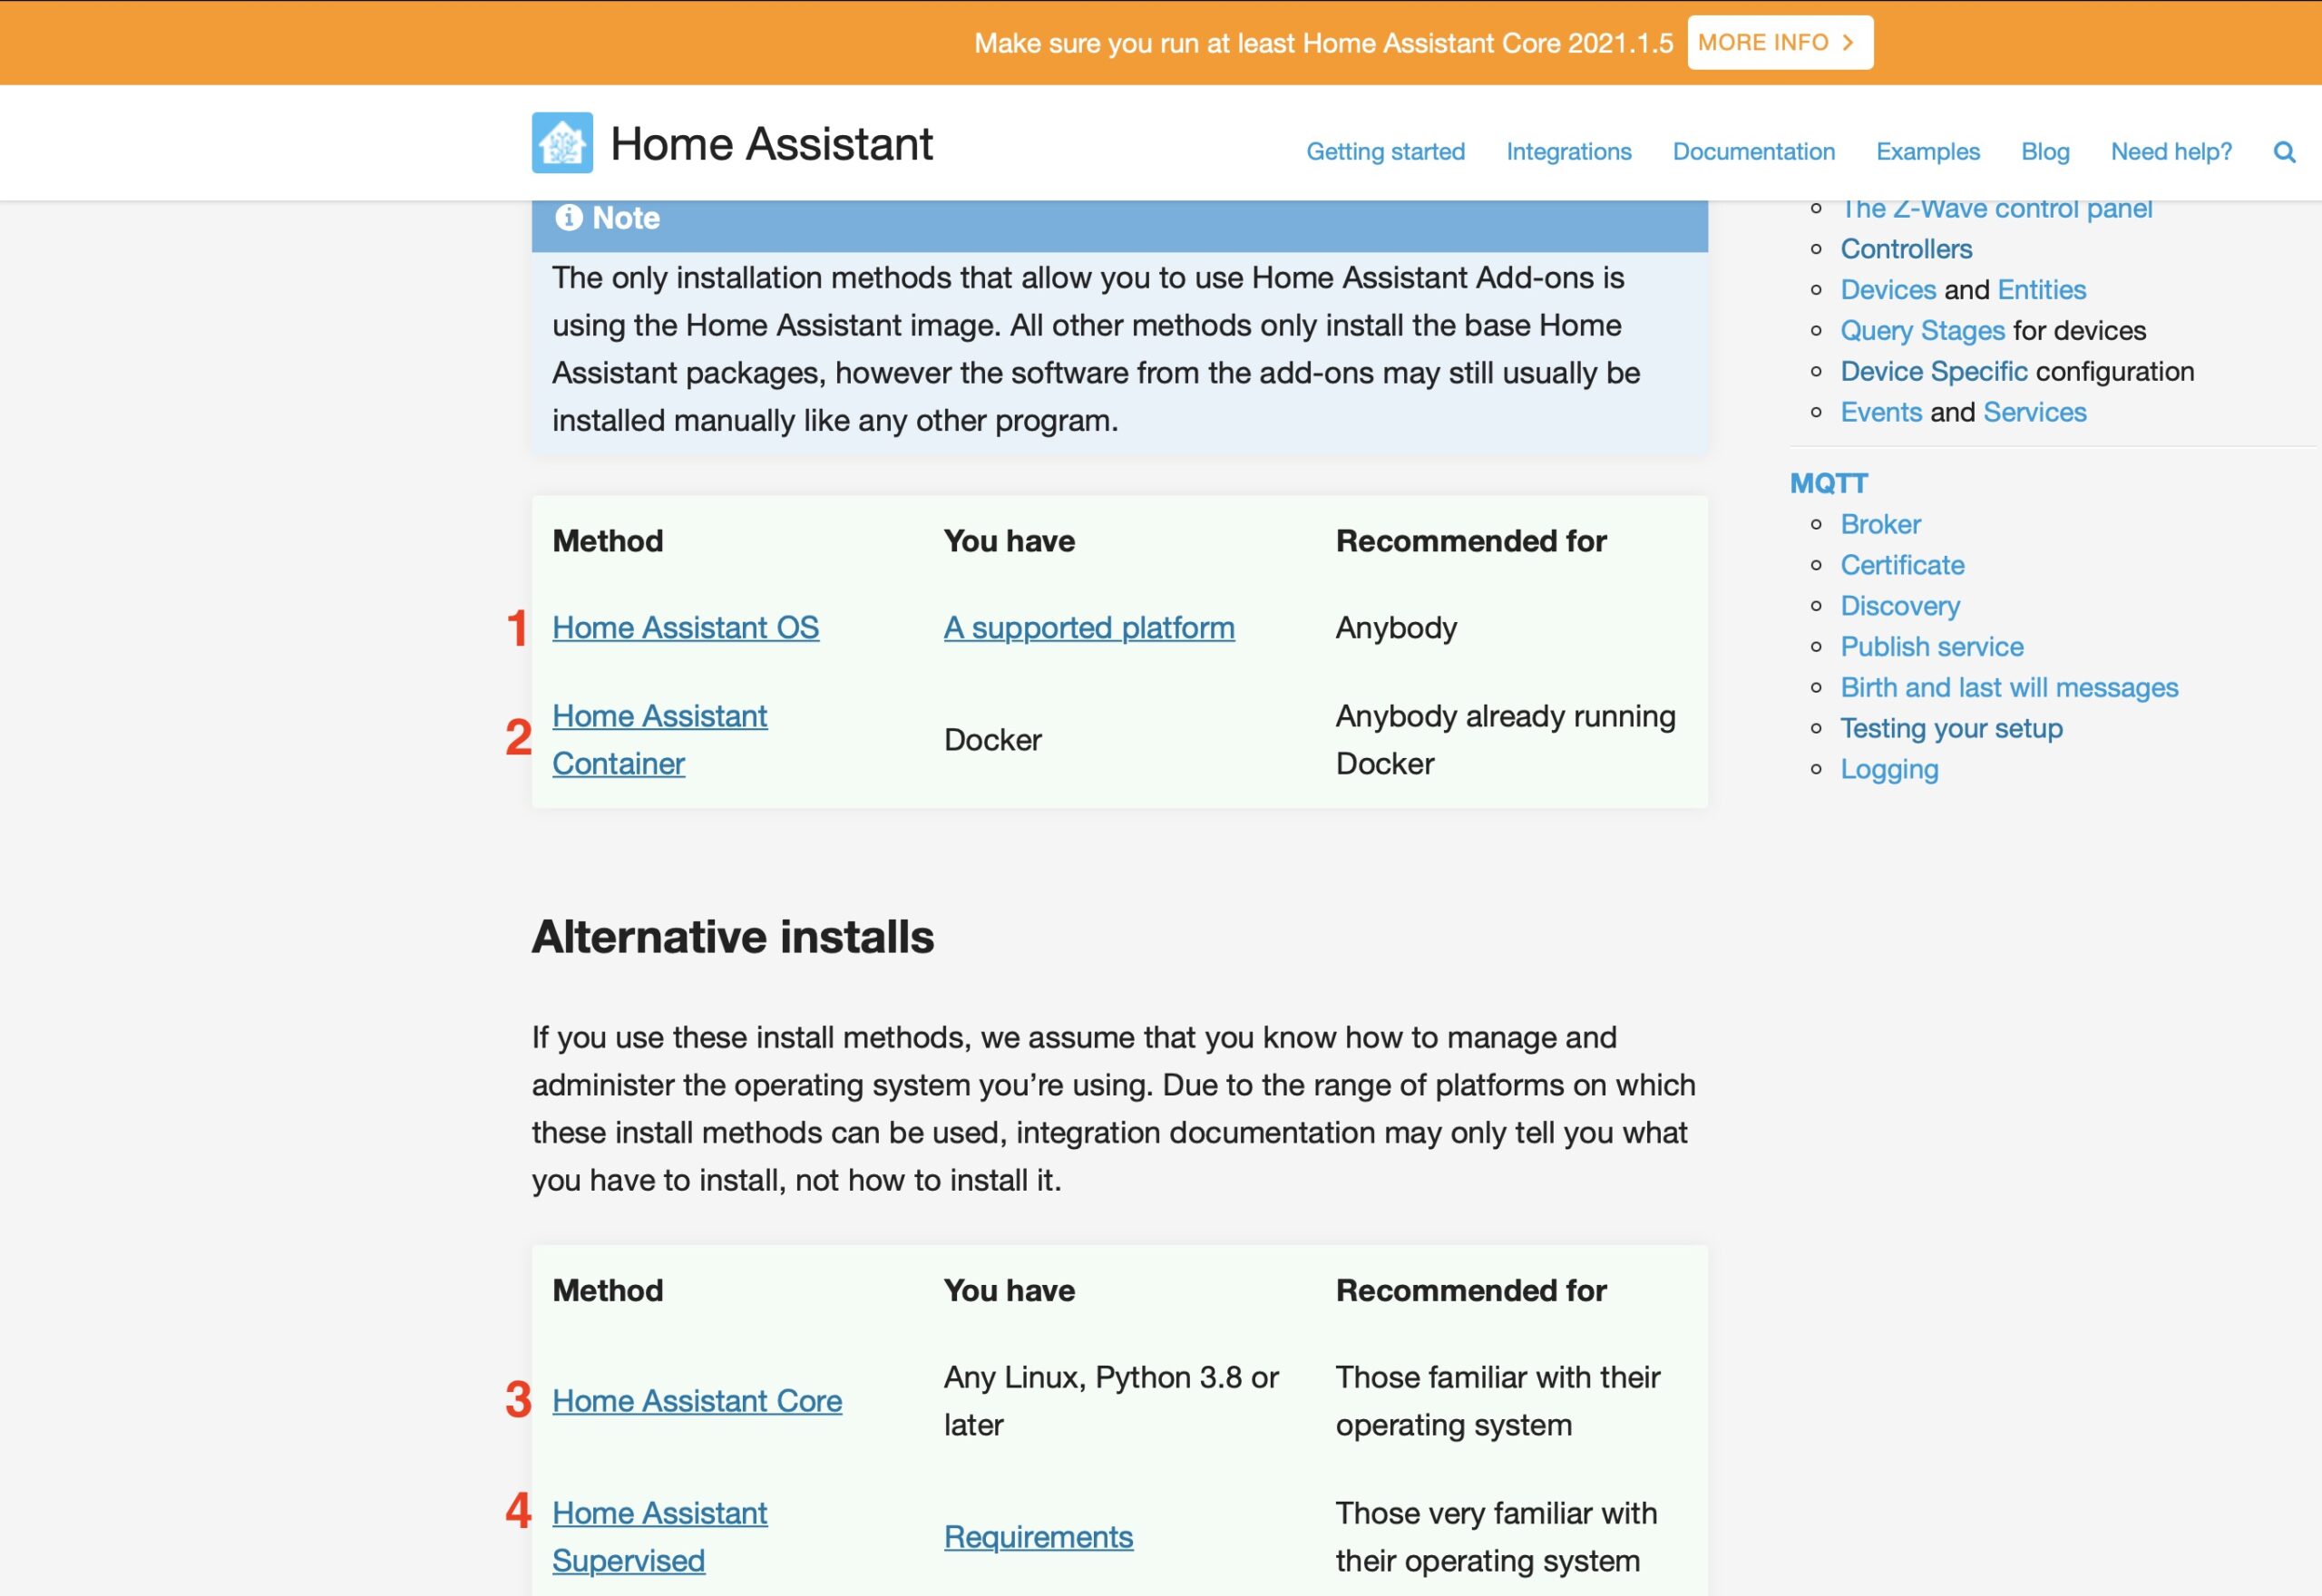 There are 4 official ways to Install Home Assistant 